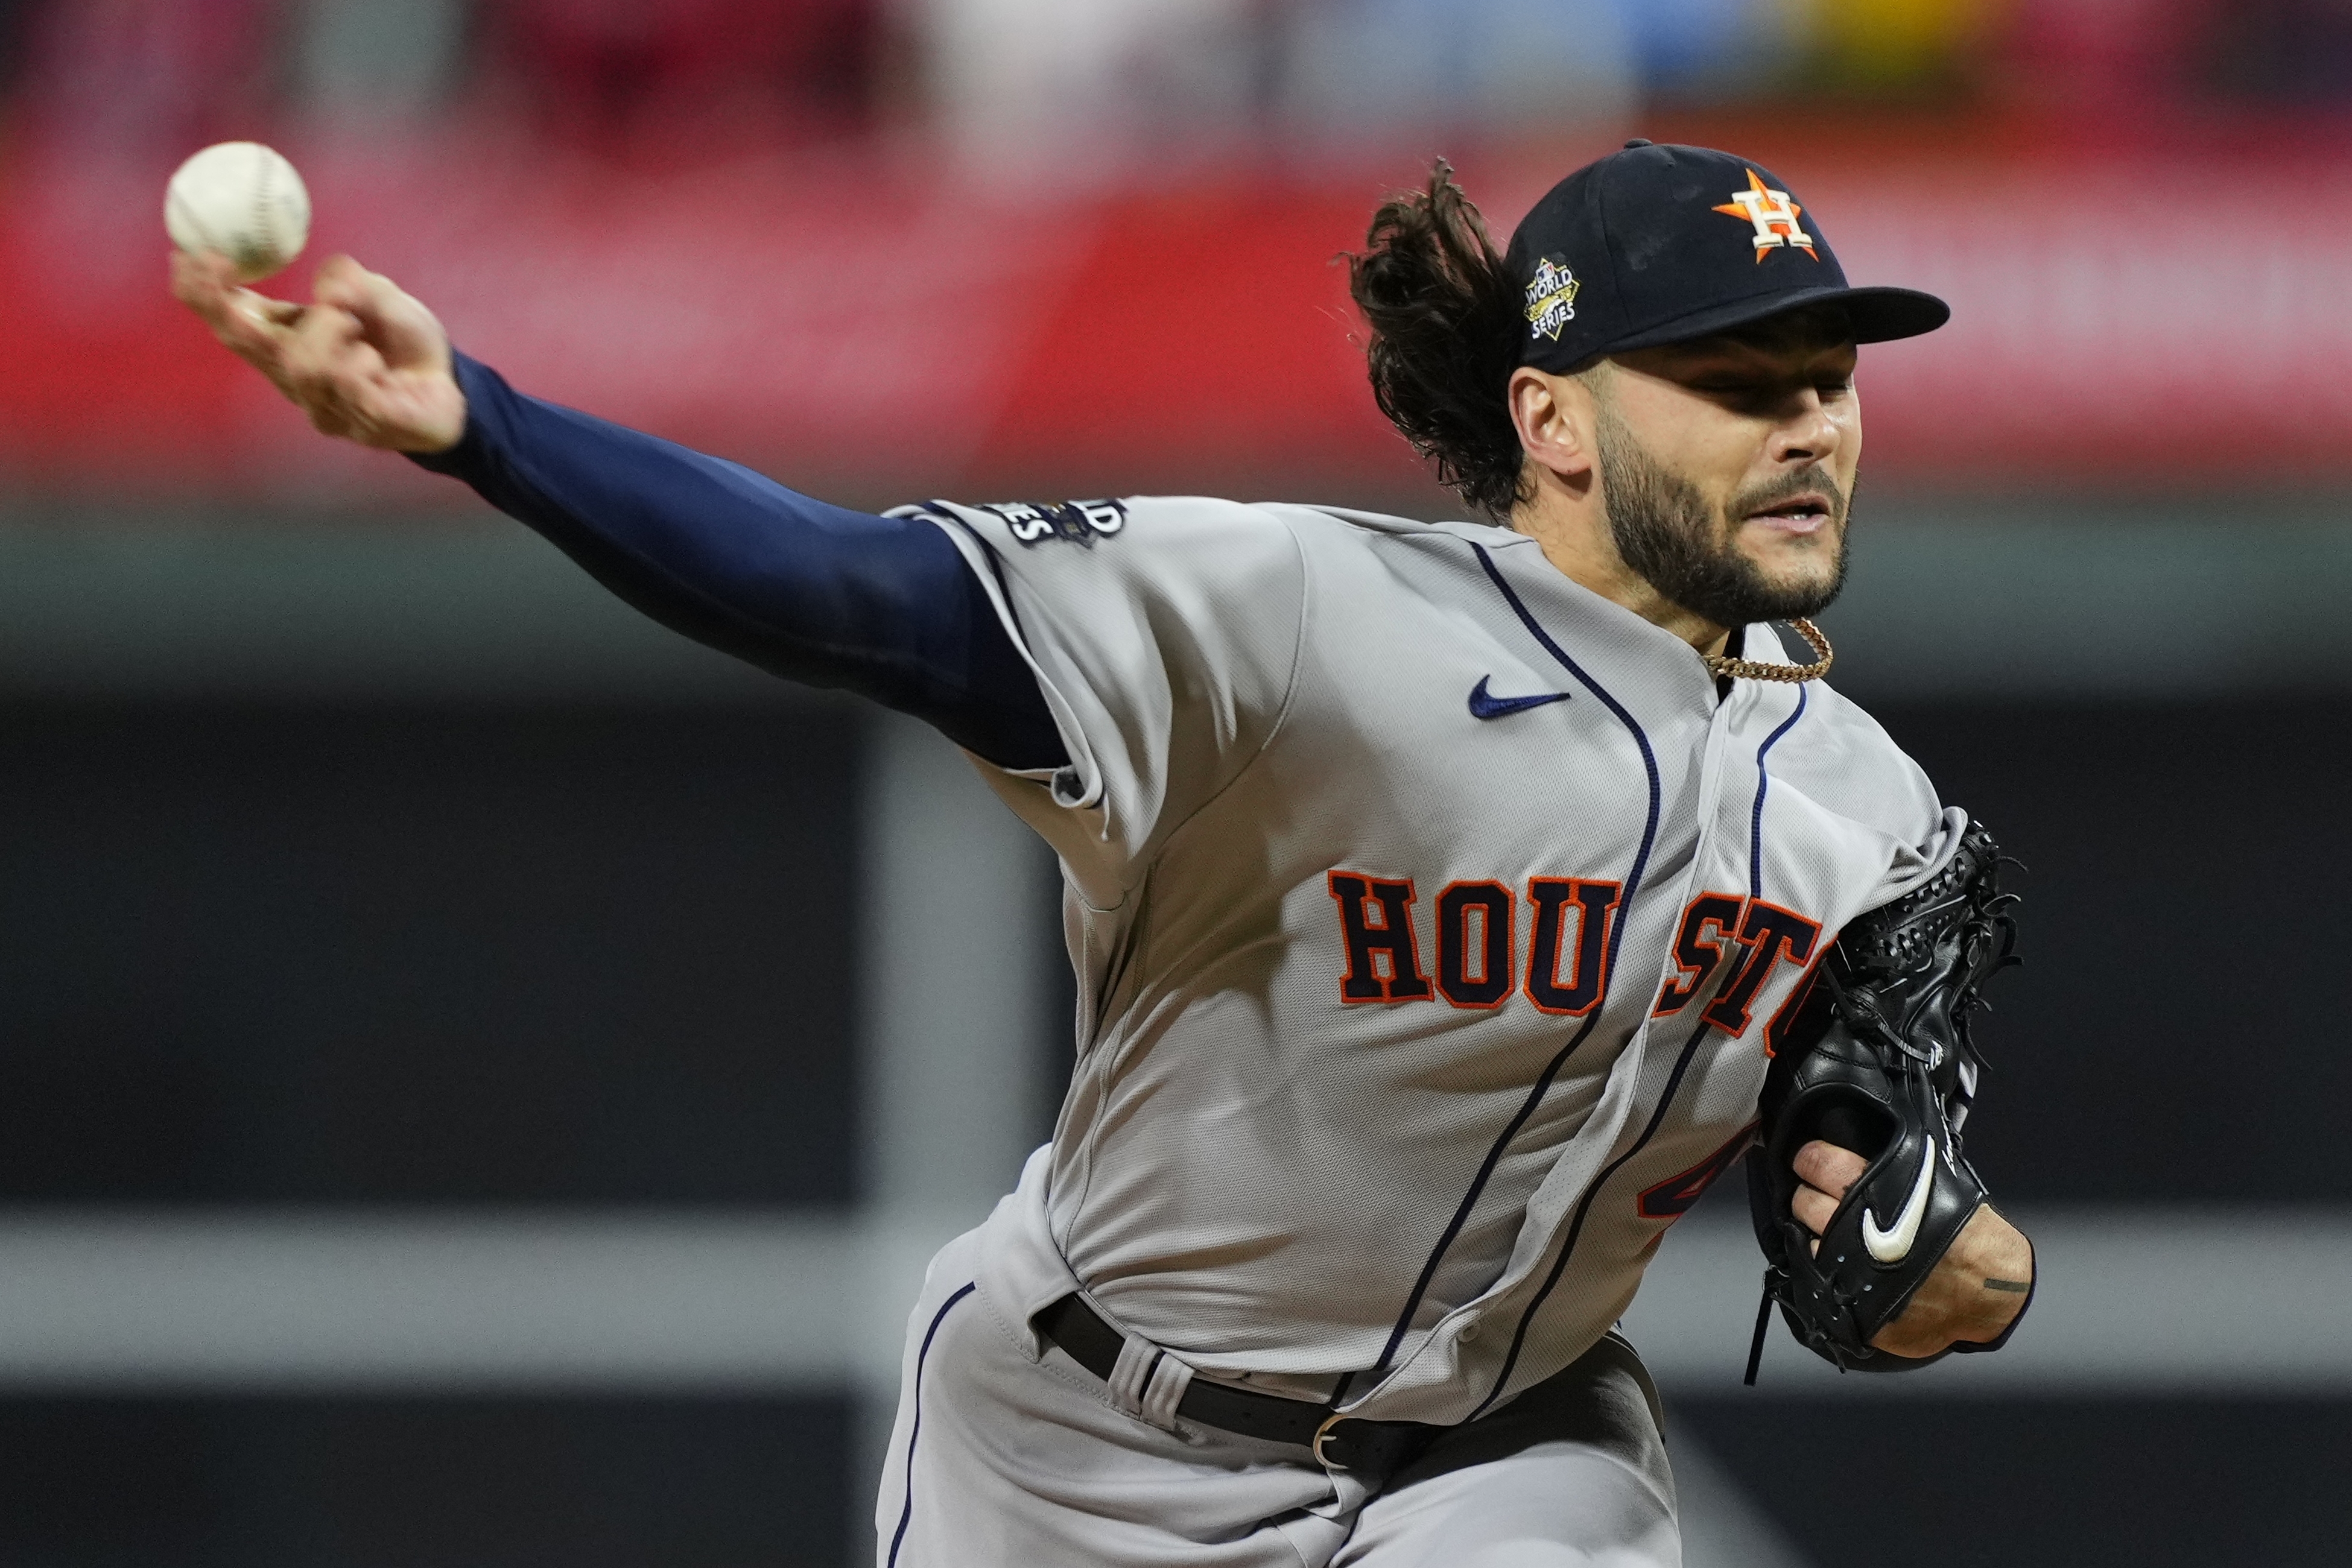 Lance McCullers Jr. 1st to give up 5 home runs in World Series game